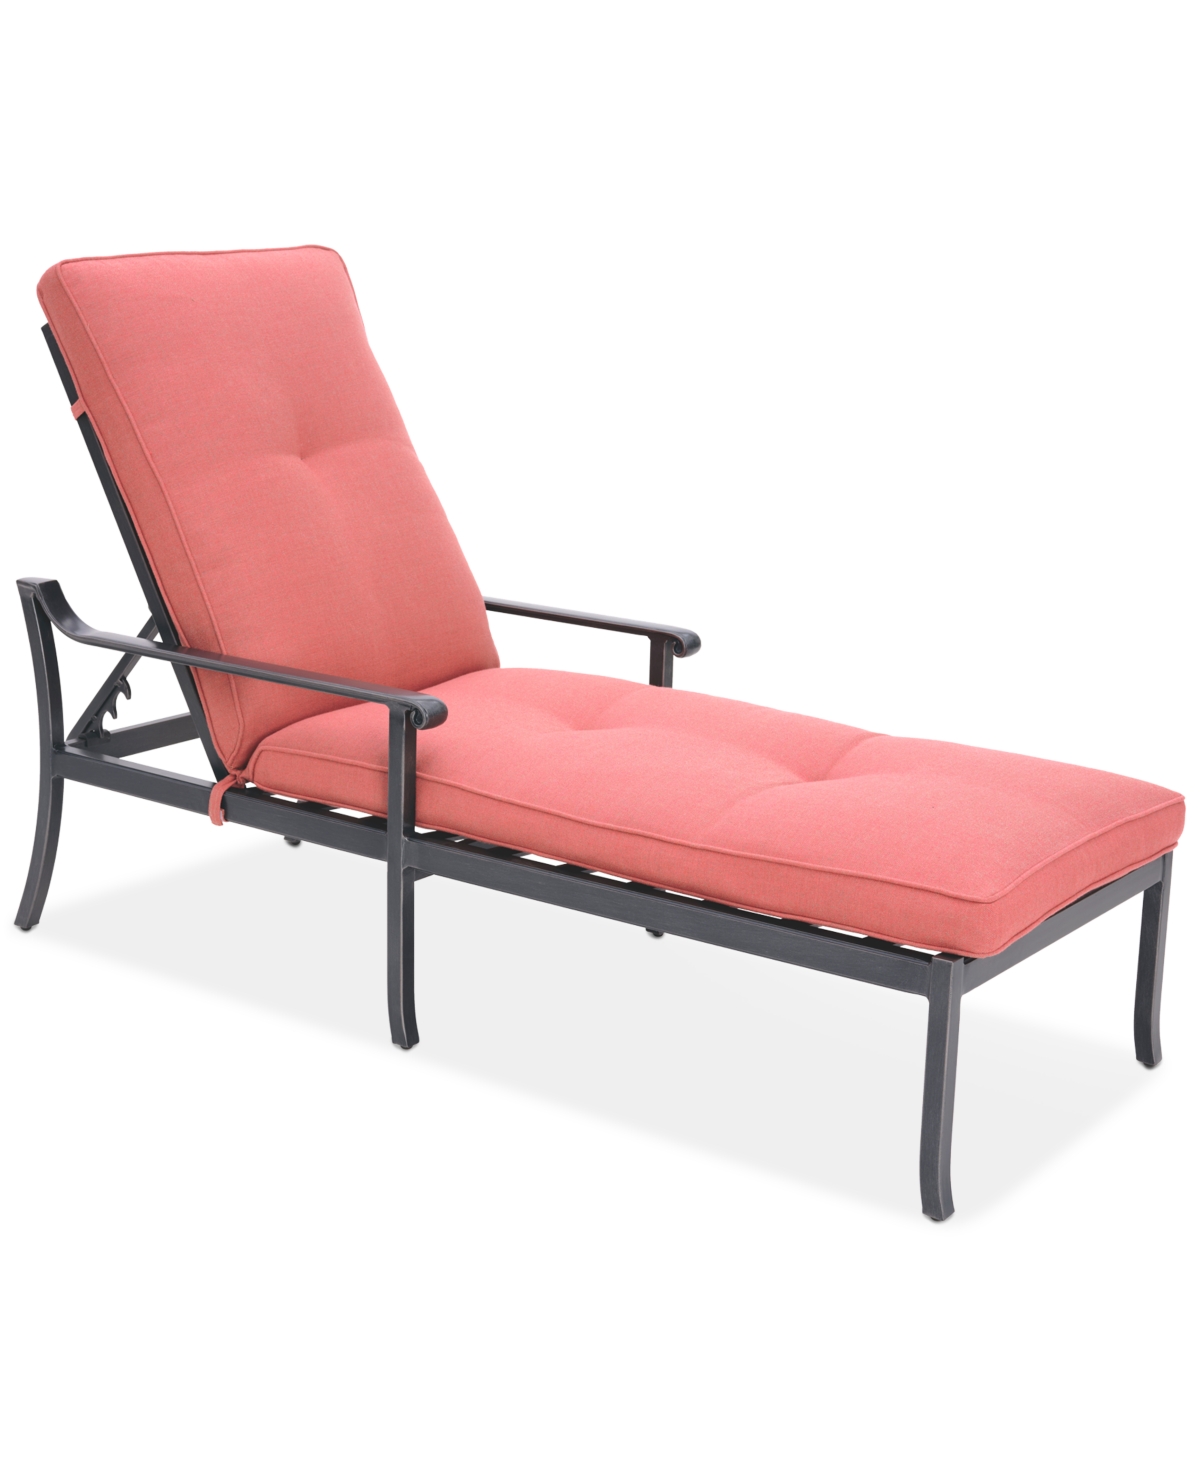 Agio Wythburn Mix And Match Scroll Outdoor Chaise Lounge In Peony Brick Red,bronze Finish